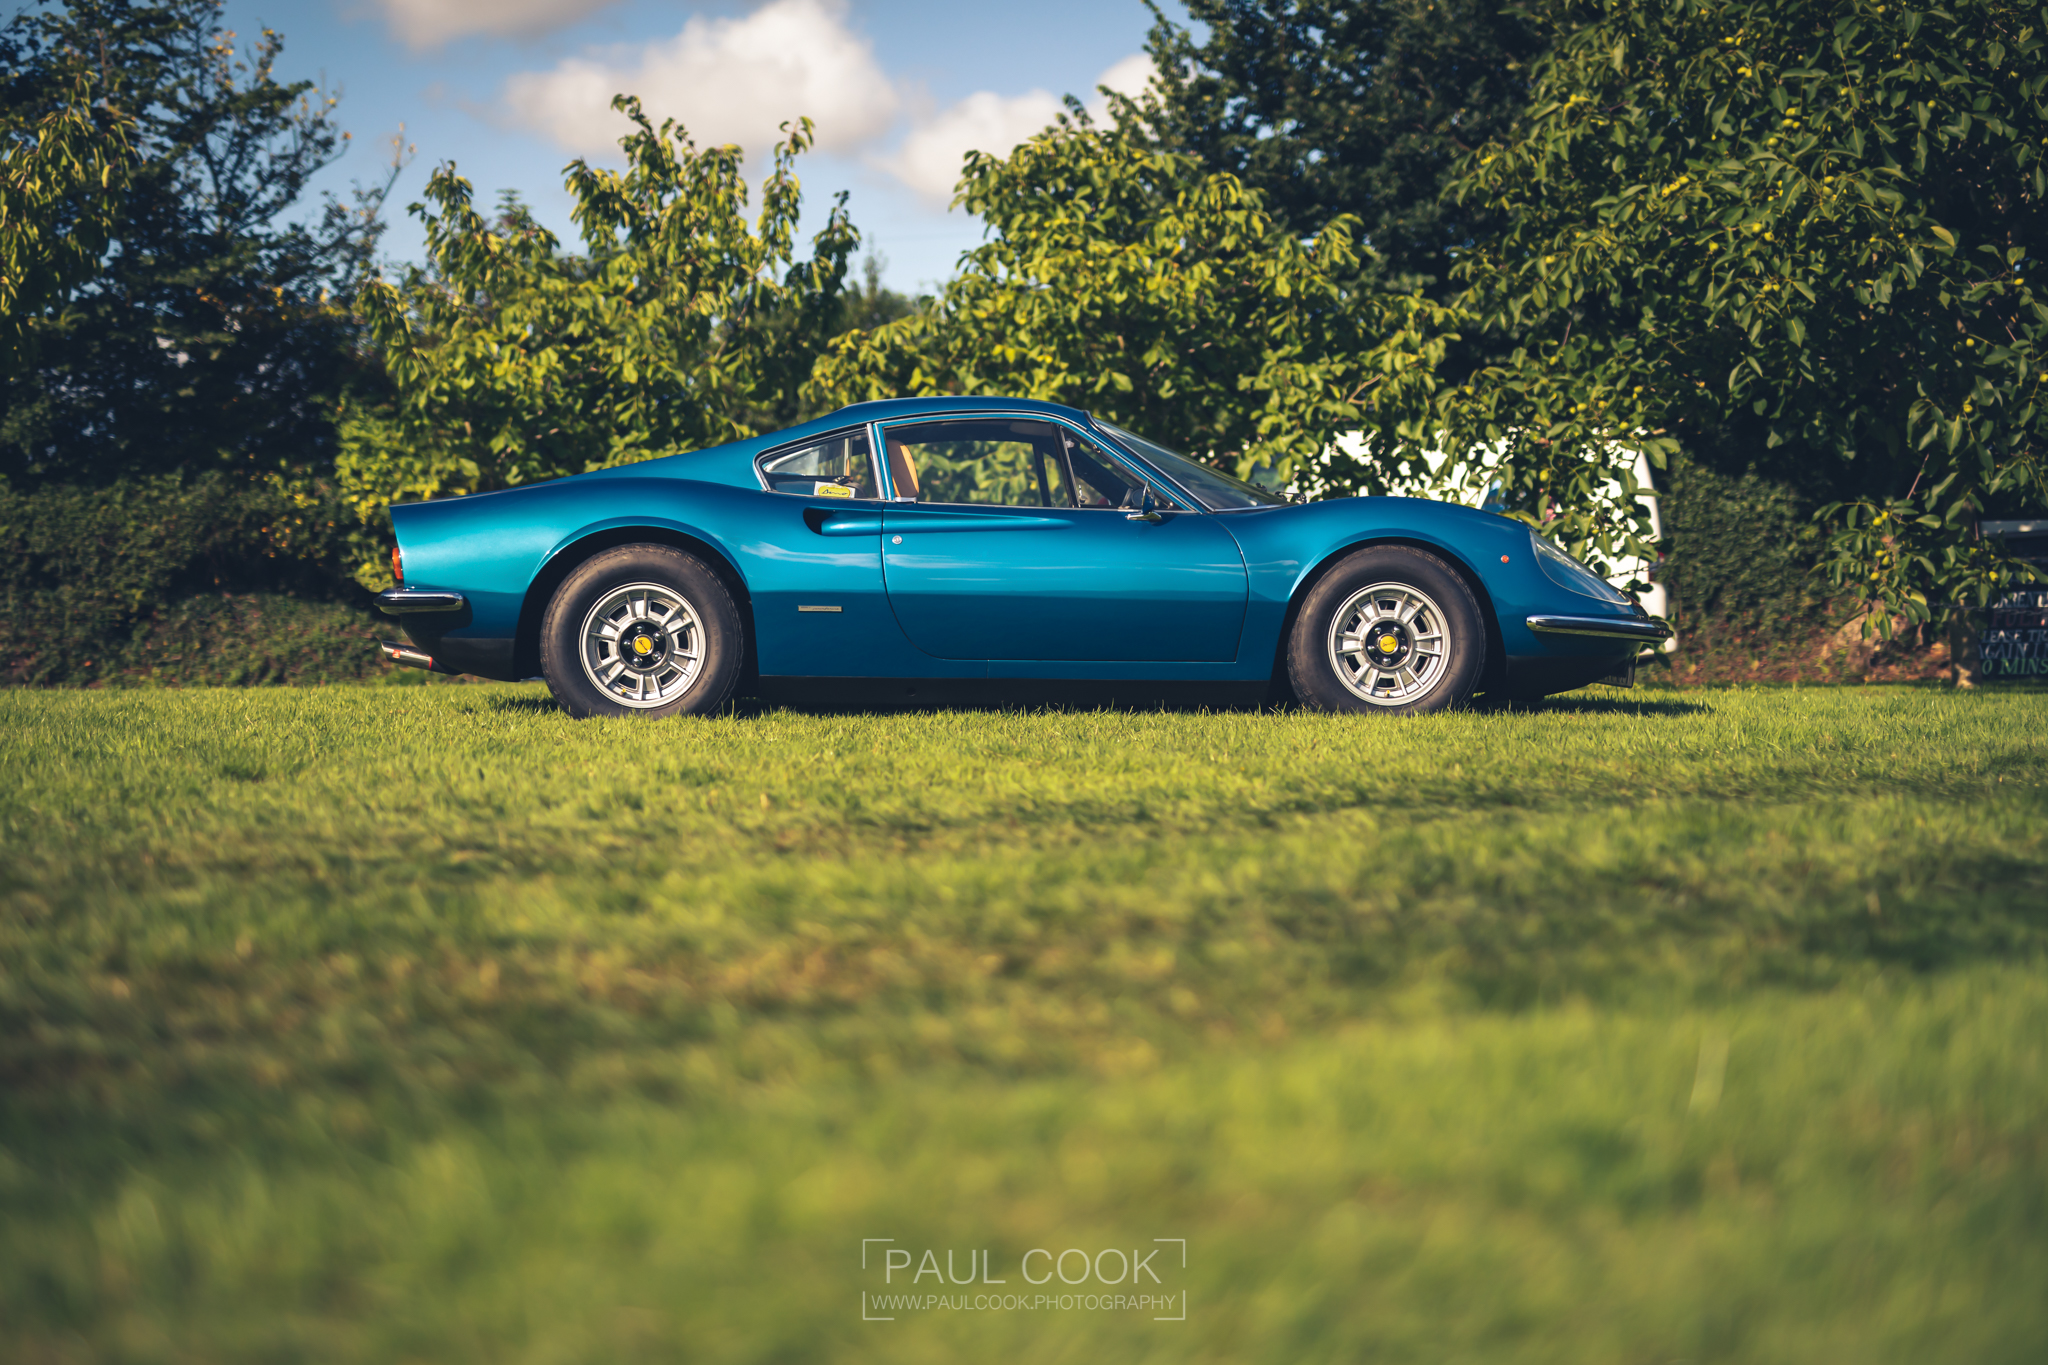 What are your top 3 best looking Ferraris of all time? - Page 4 - Ferrari Classics - PistonHeads